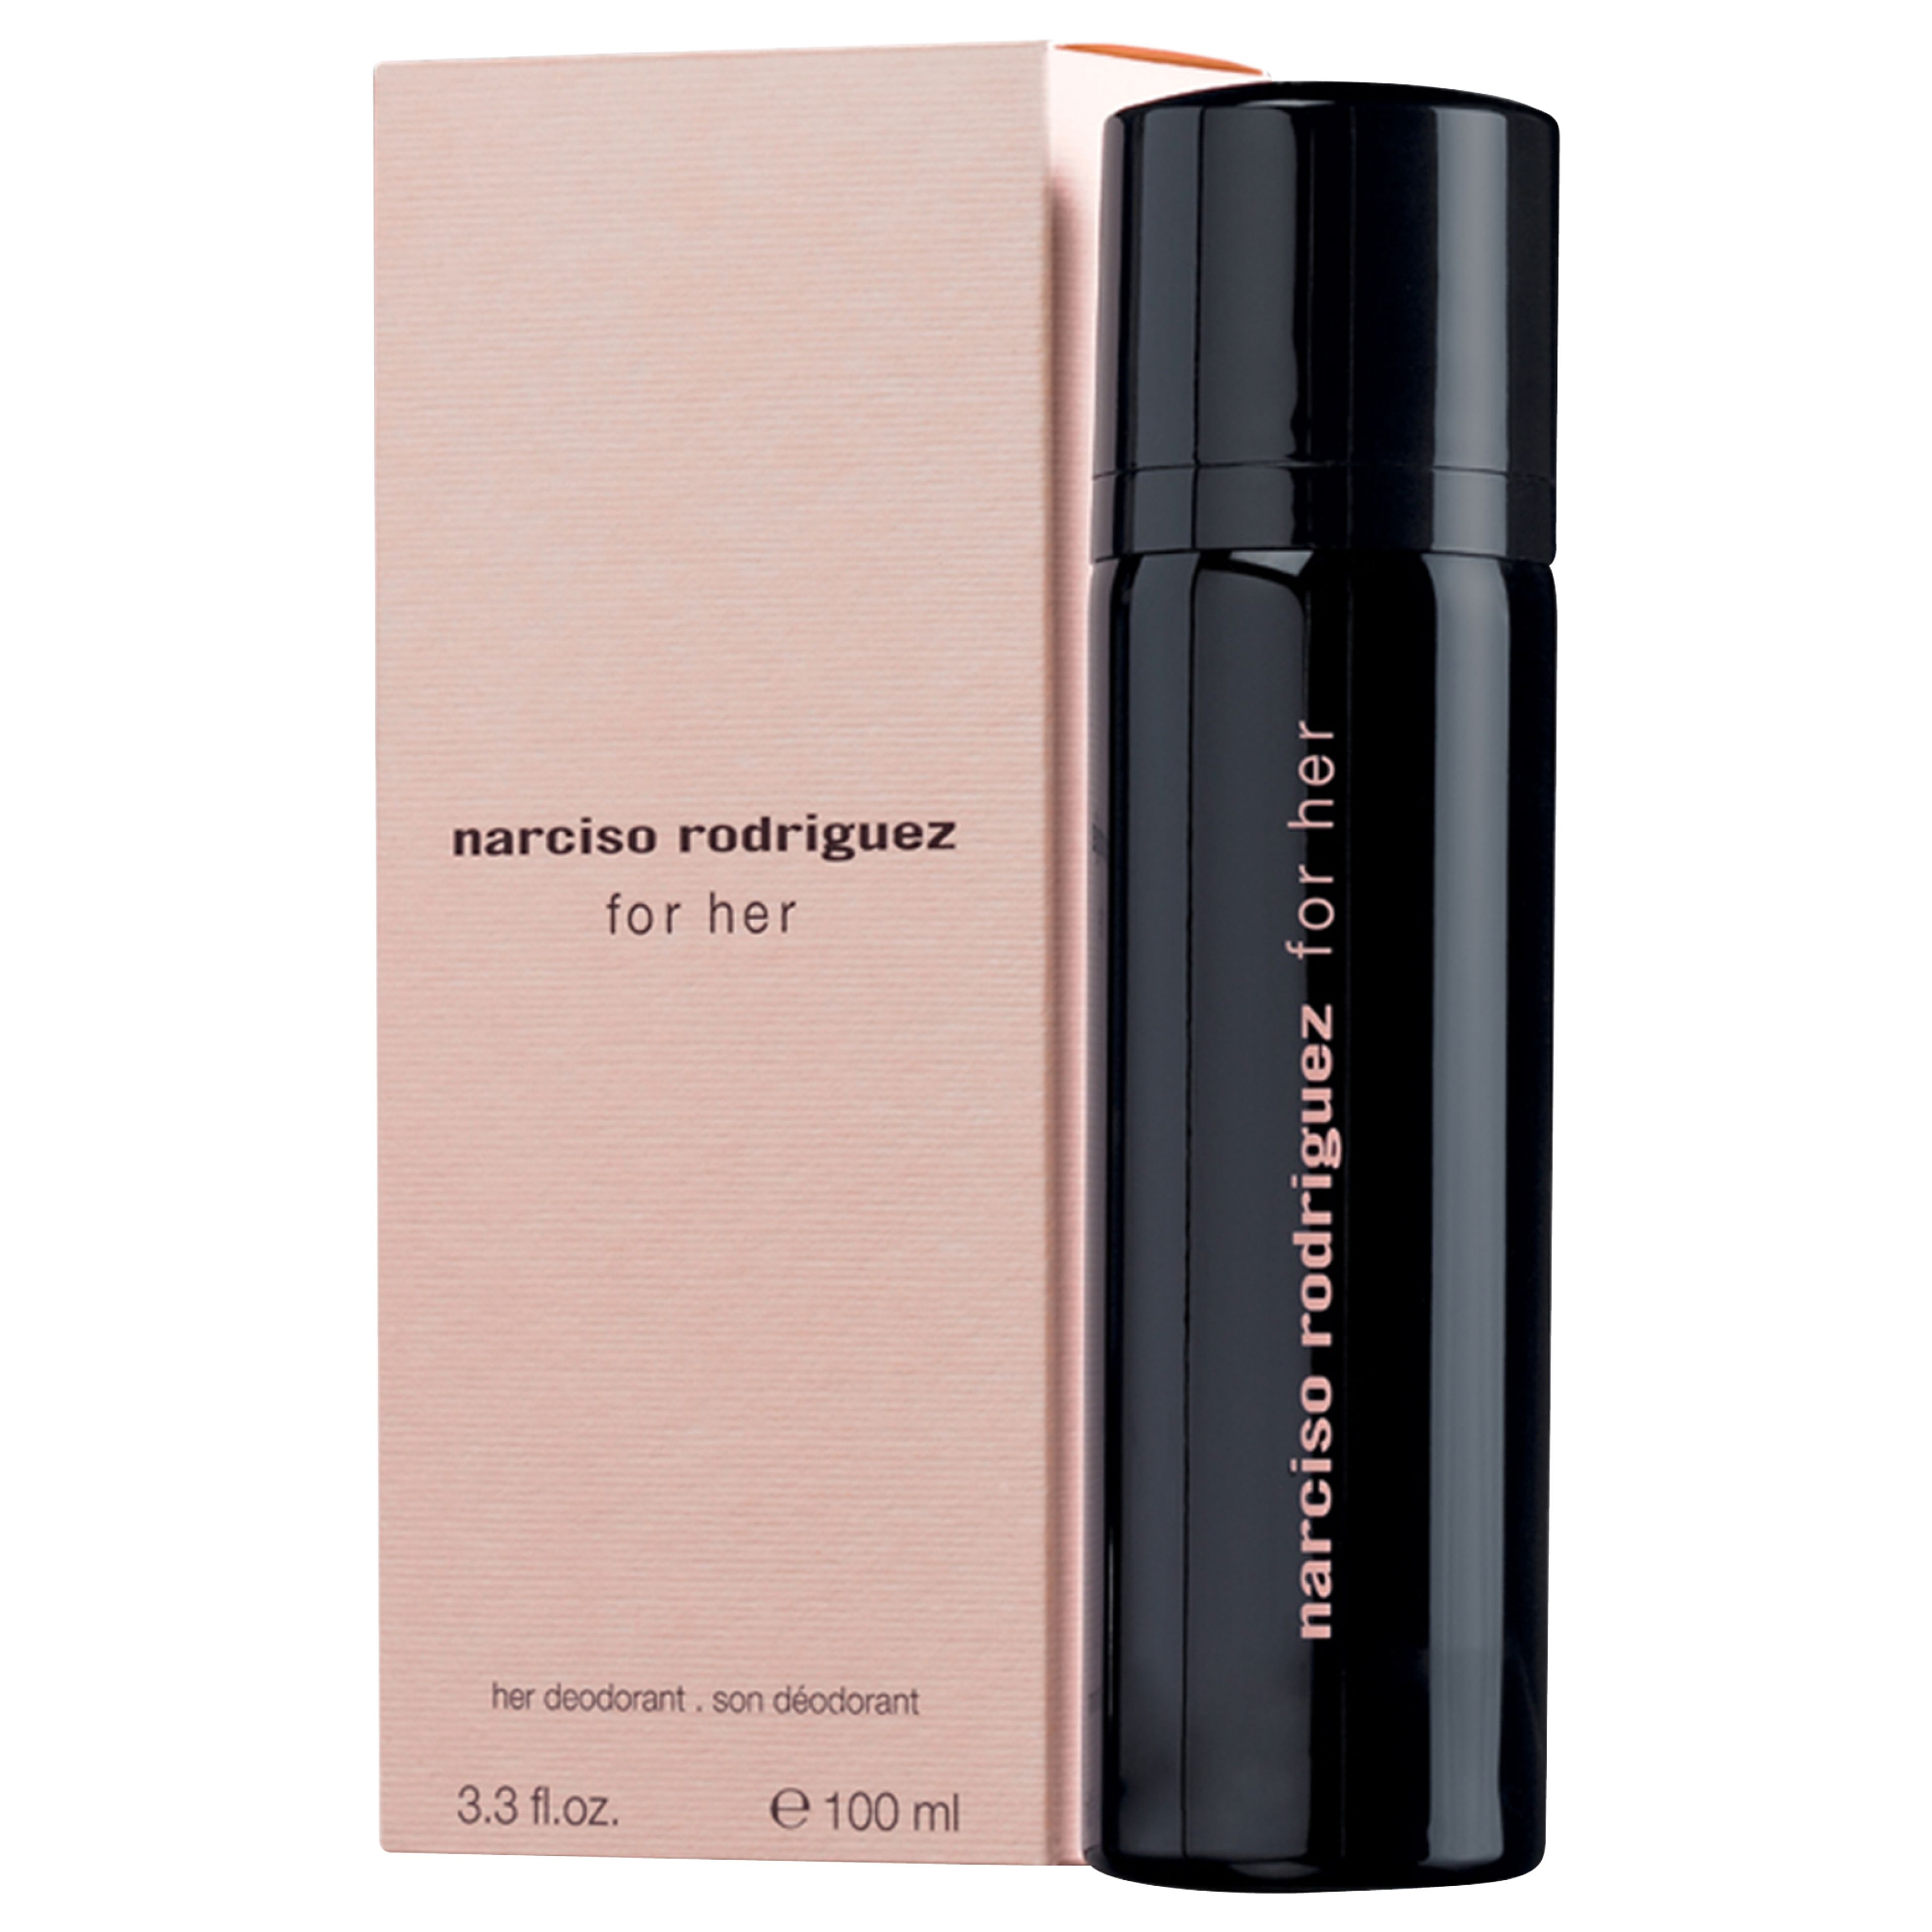 Narciso Rodriguez For Her Deodorant 100ml 2